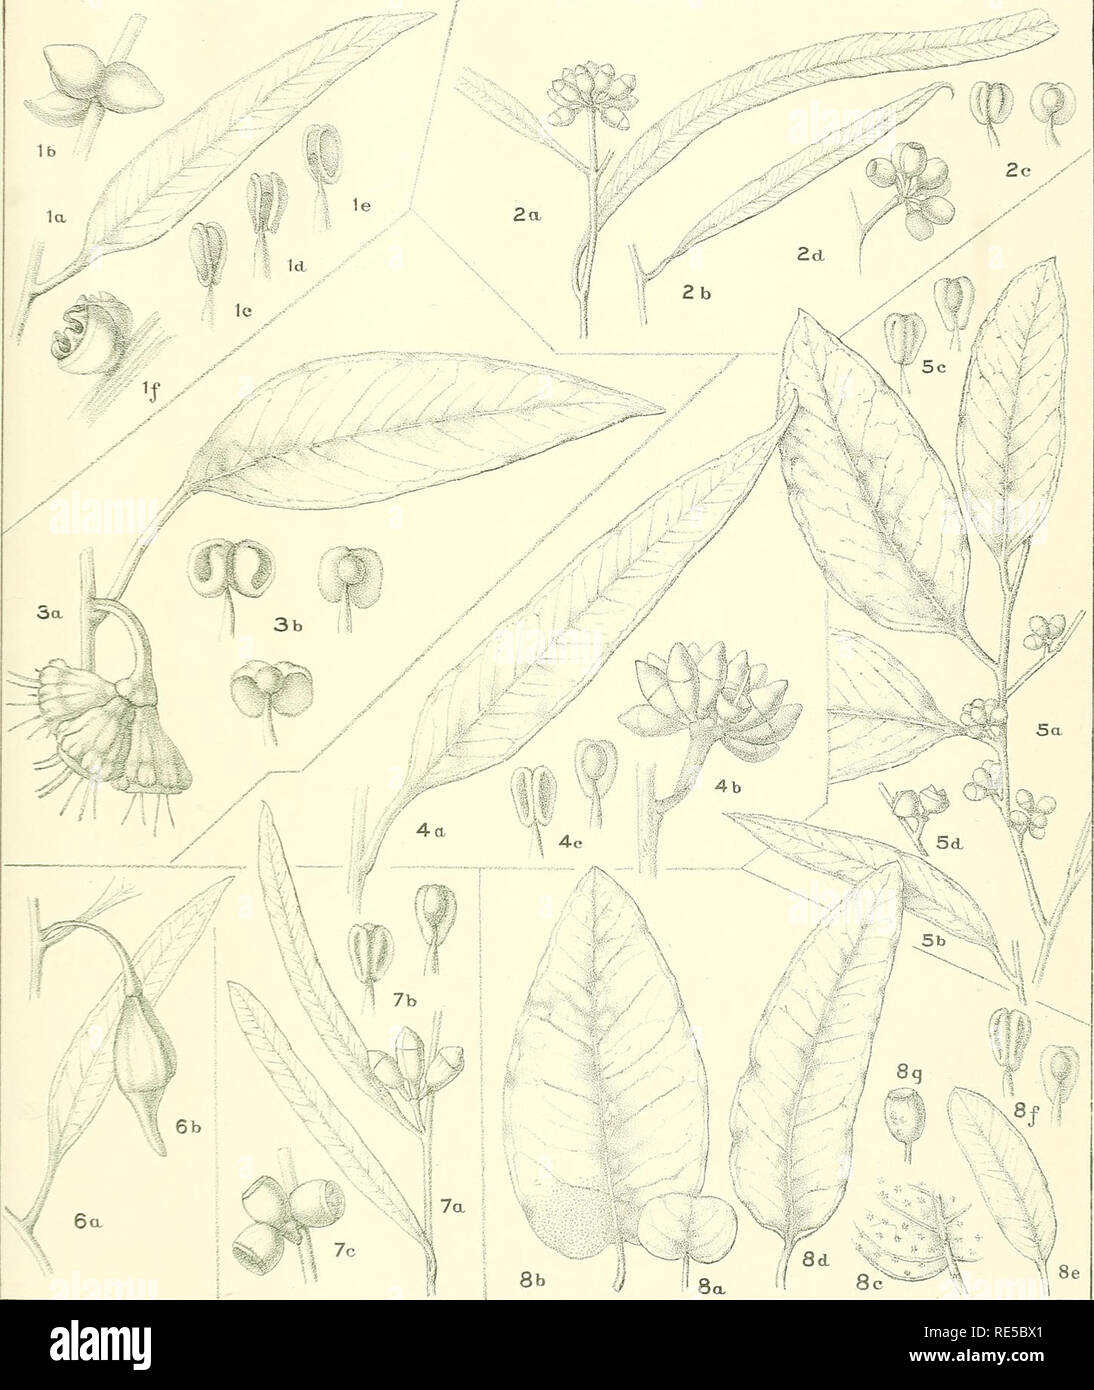 . A critical revision of the genus Eucalyptus. Eucalyptus. Crit. Rev. Eucalyptus. Pl. 283.. EUCALYPTUS DJFLERA Andrews. (/). E. AGGREGATA Deane and Maiden ; [See also Plate 71.] (E. RYDALENSIS Baker and Smith.) (5). E. OVULARIS Maiden and Blakely, n. sp. (2.) tSee als° Plate 235] E. KESSELLI Maiden and Blakely, n. sp. (3). E- FORESTIANA Diels. (6&quot;). [See also Plate 95.] E. DESMONDENSIS Maiden and Blakely, n. sp. (4). E- MERRICKjE Maiden and Blakely, n. sp. (7), E. CLAVIGERA A. Cunn ; var.: GILBERTENSIS, n. var. Maiden and Blakely. (S). [See also Plate 152.]. Please note that these images  Stock Photo